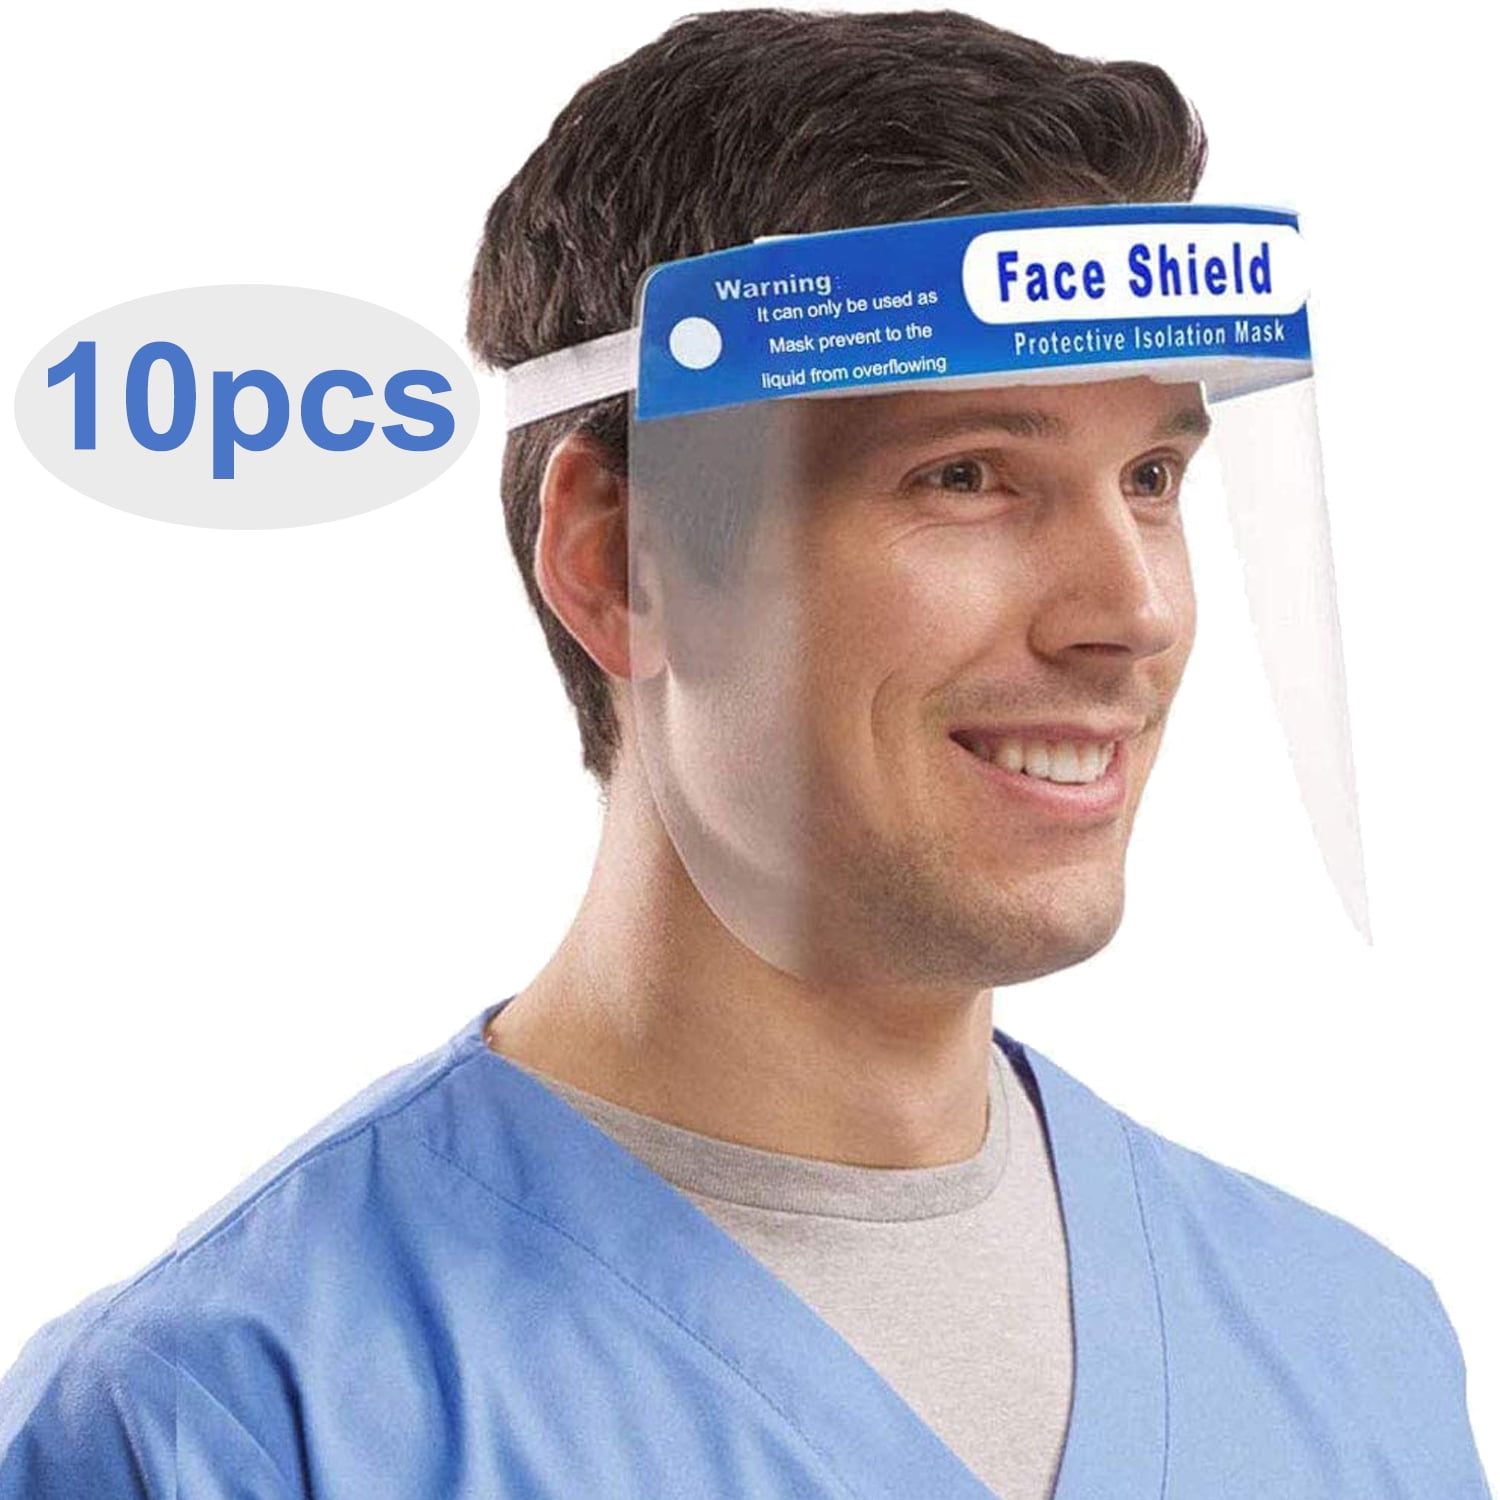 10 PCS Safety Protective Splash Proof Full Head-mounted Face Shield Screen 